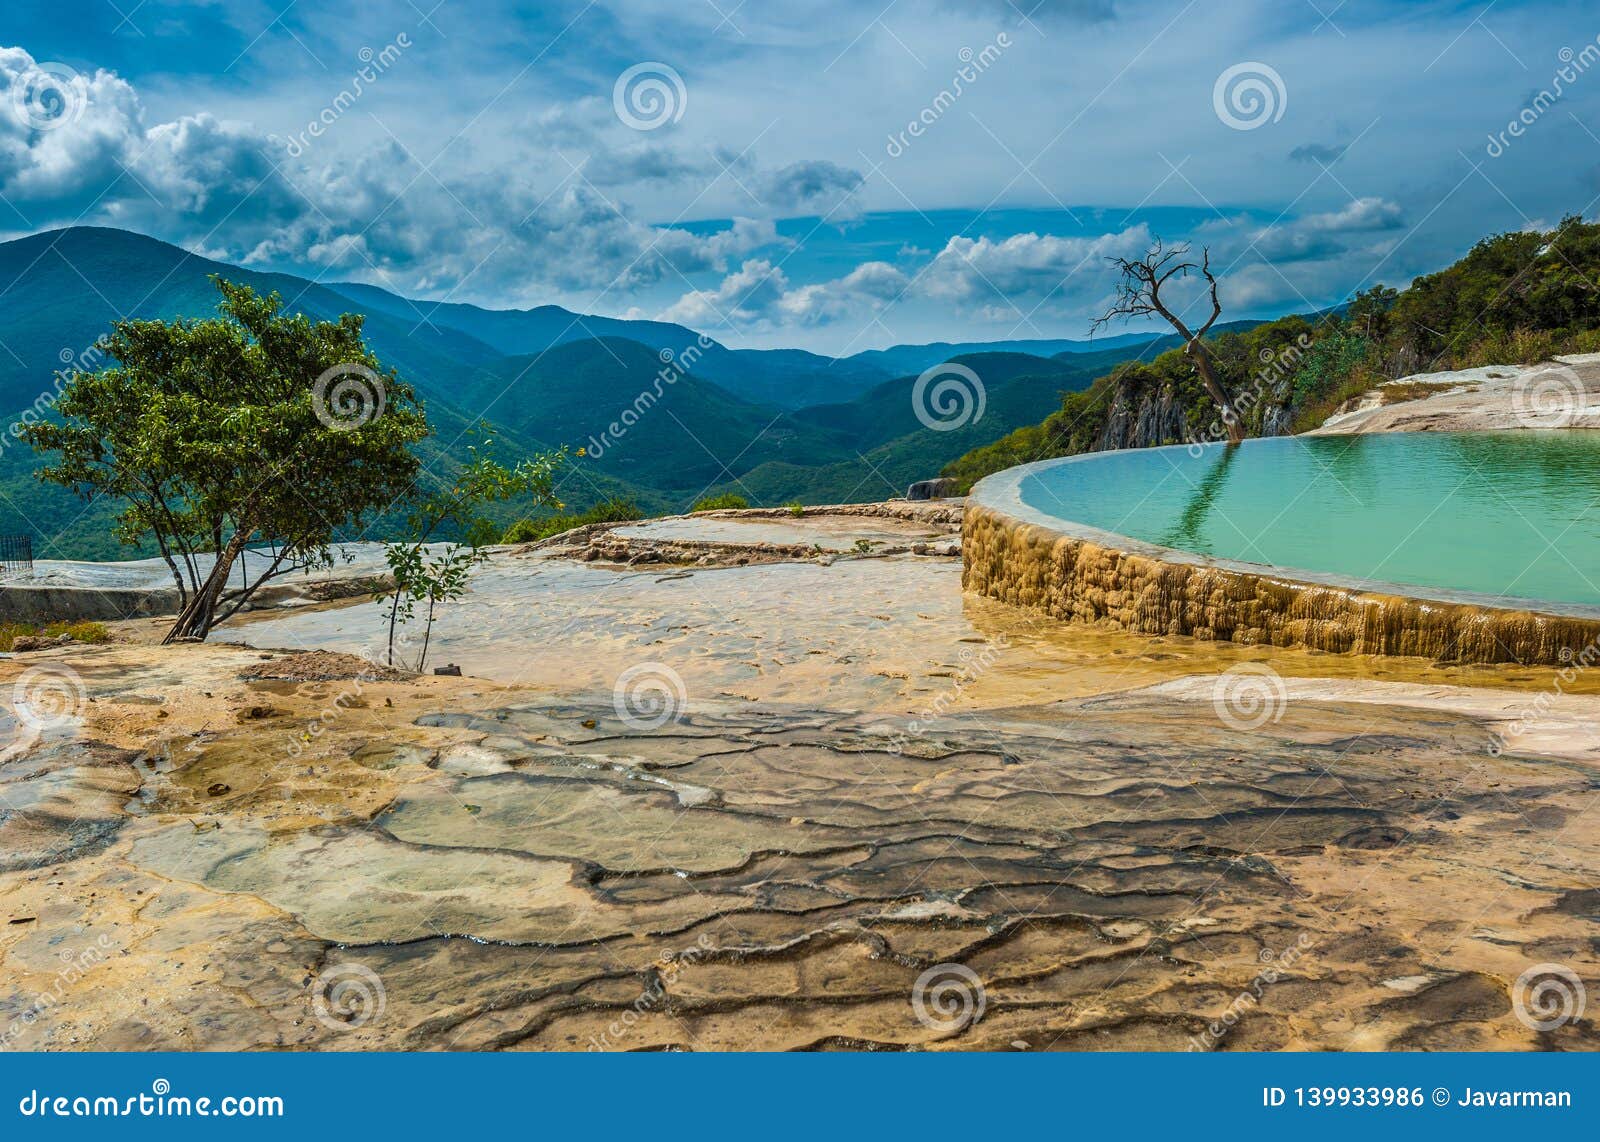 hierve el agua, natural rock formations in the mexican state of oaxaca